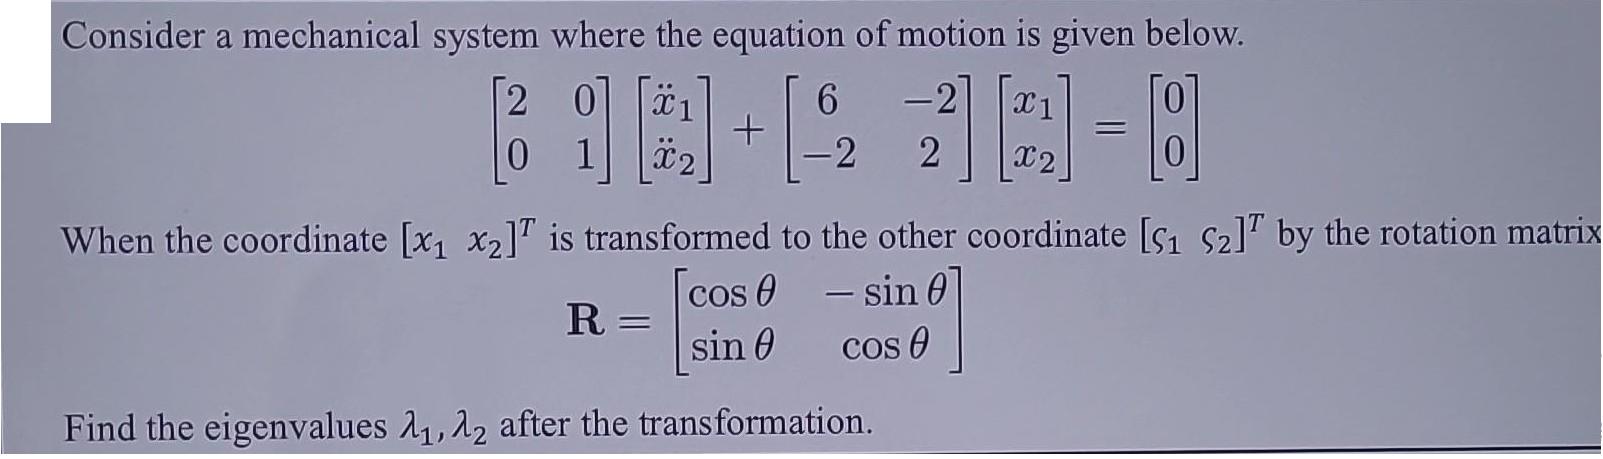 Consider a mechanical system where the equation of motion is given below. 20 6 -27 X1 ]]+[23] 6 = 0 1 X2 -2